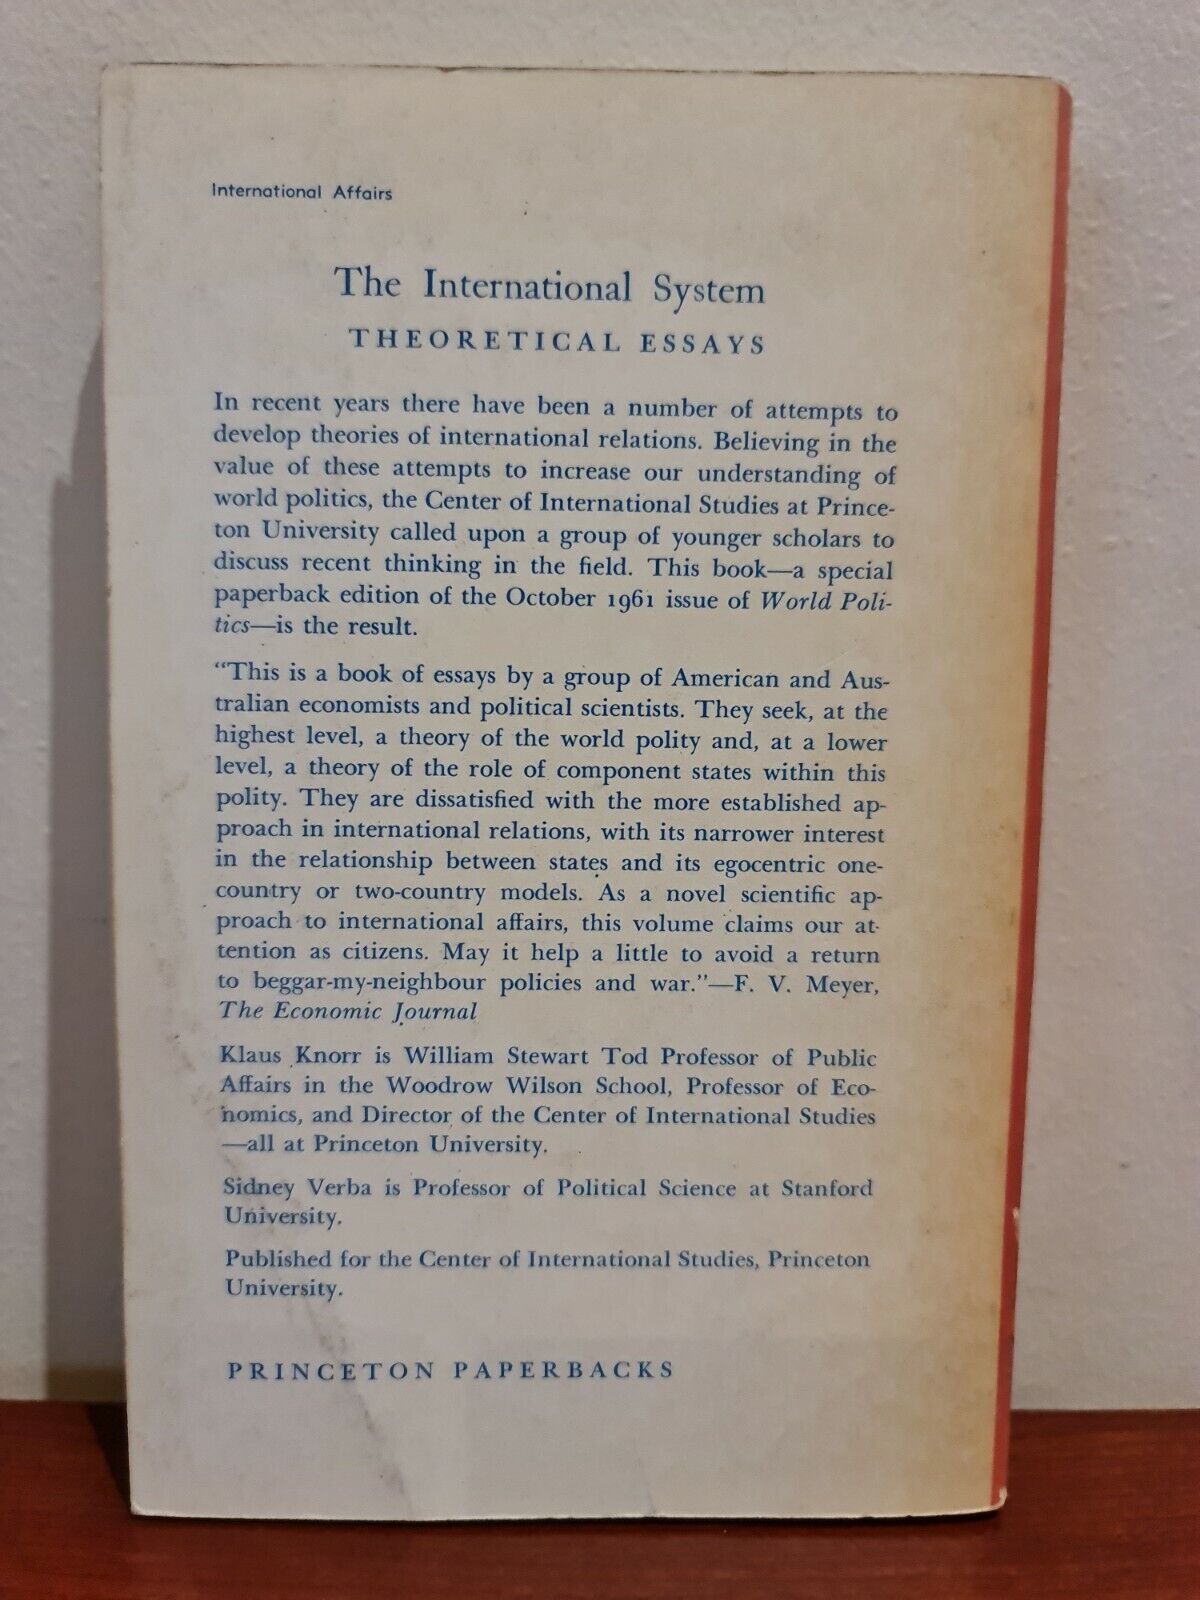 Theoretical Essays; The International System by Klaus Knorr (1967)